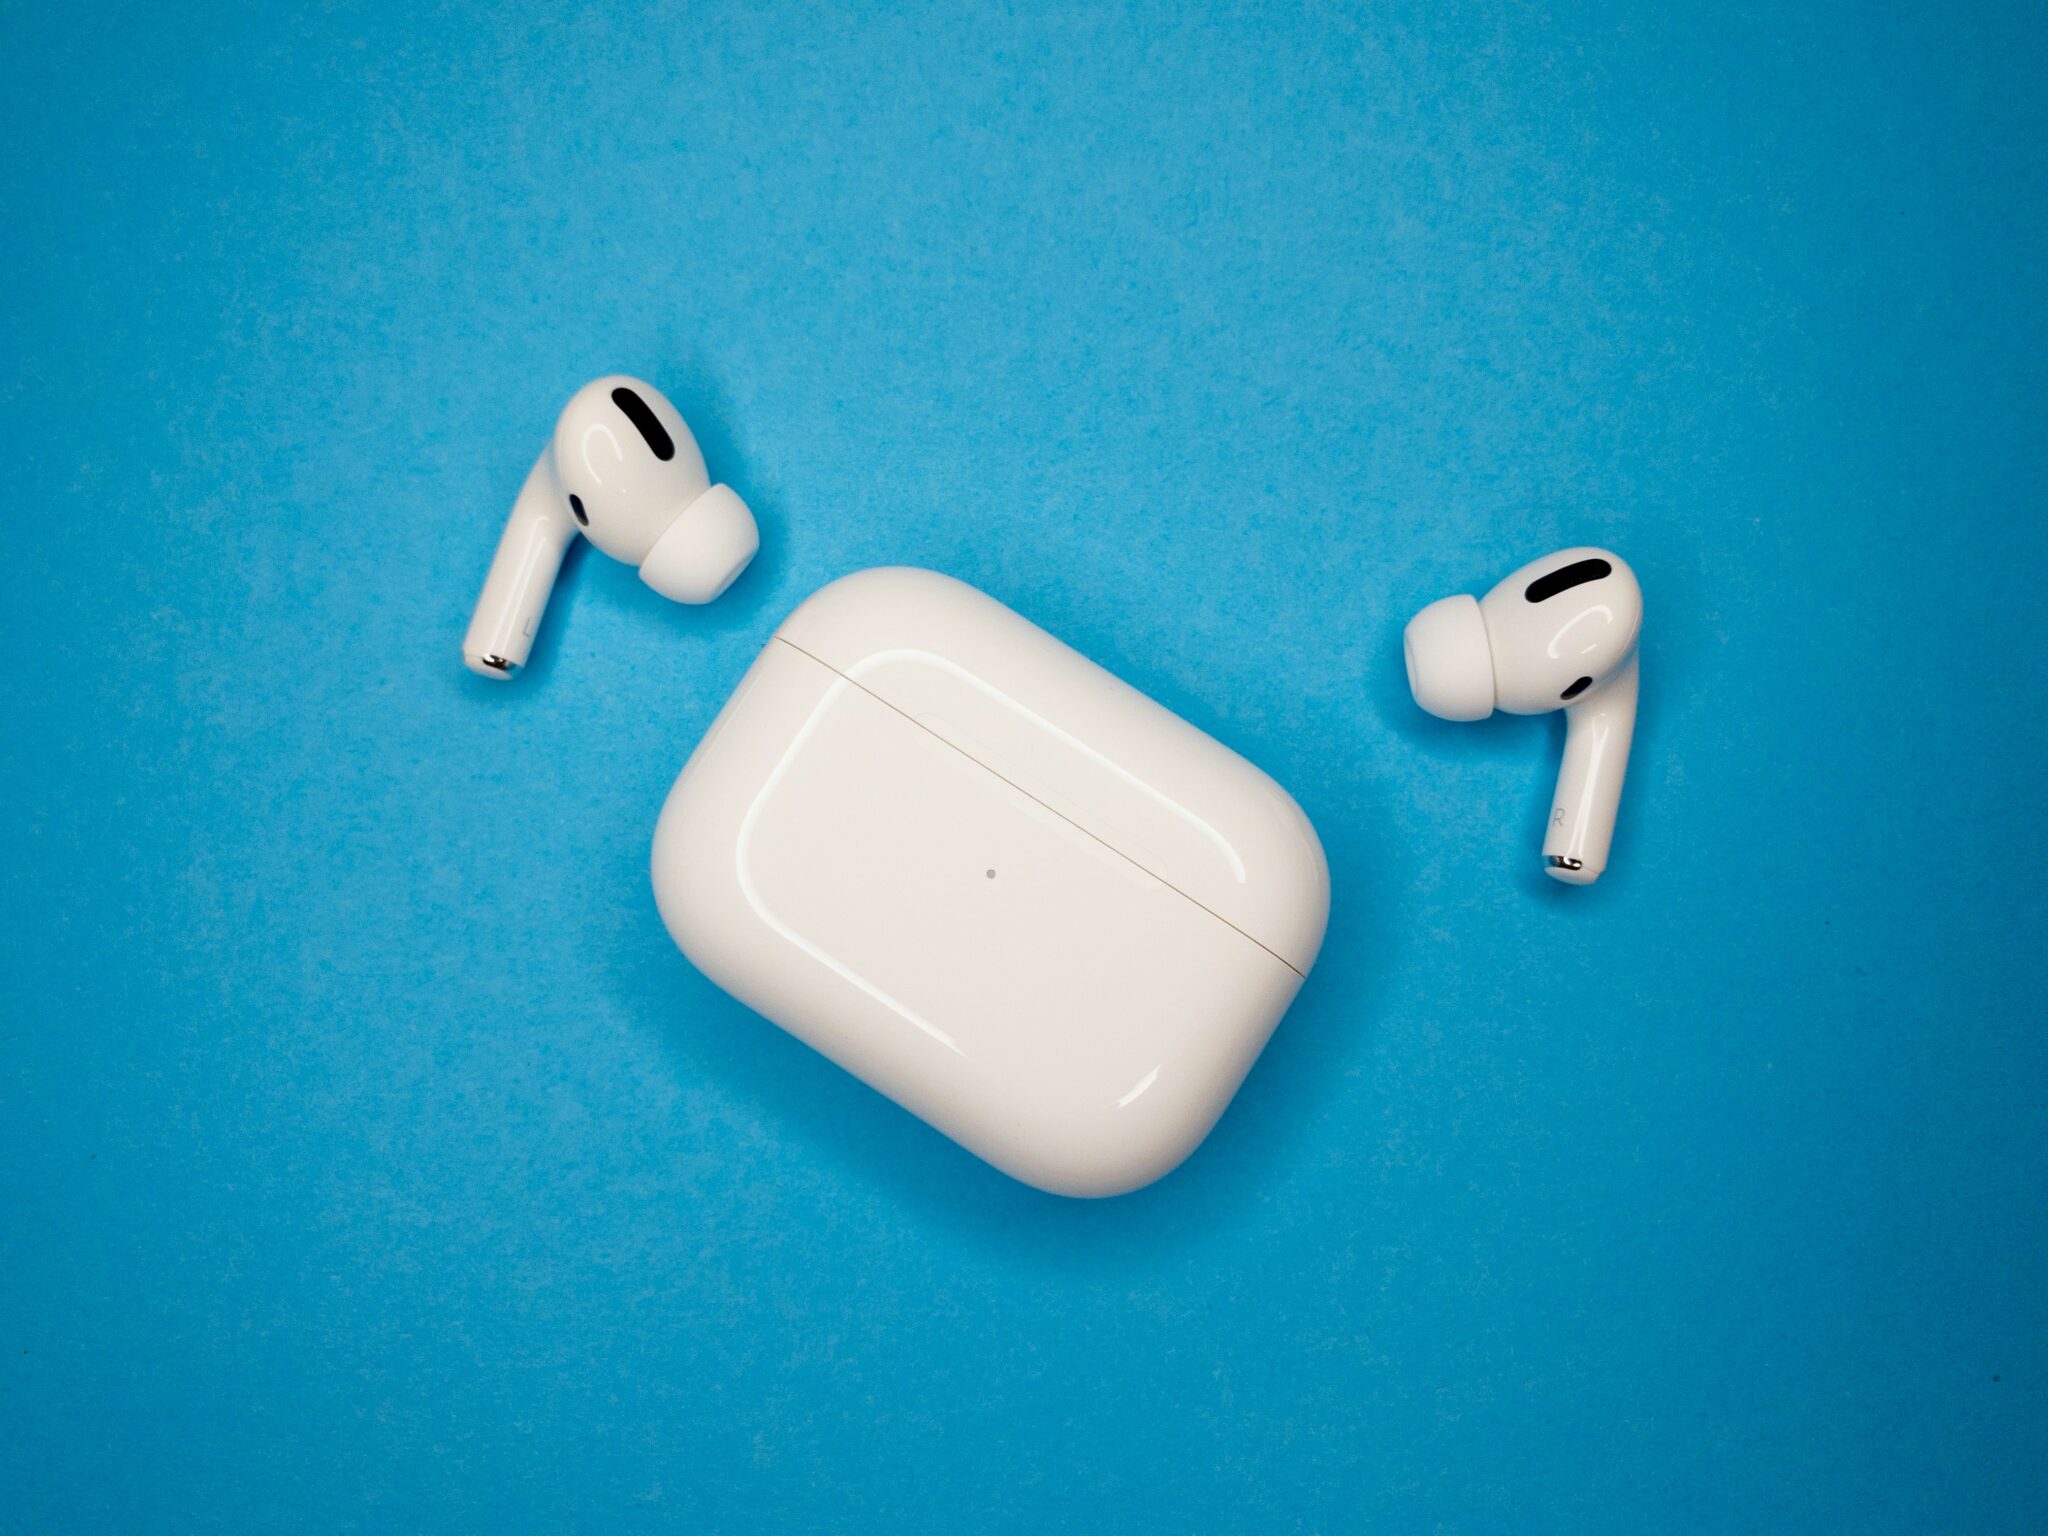 Apple Reportedly Working on Budget-Friendly AirPods Lite